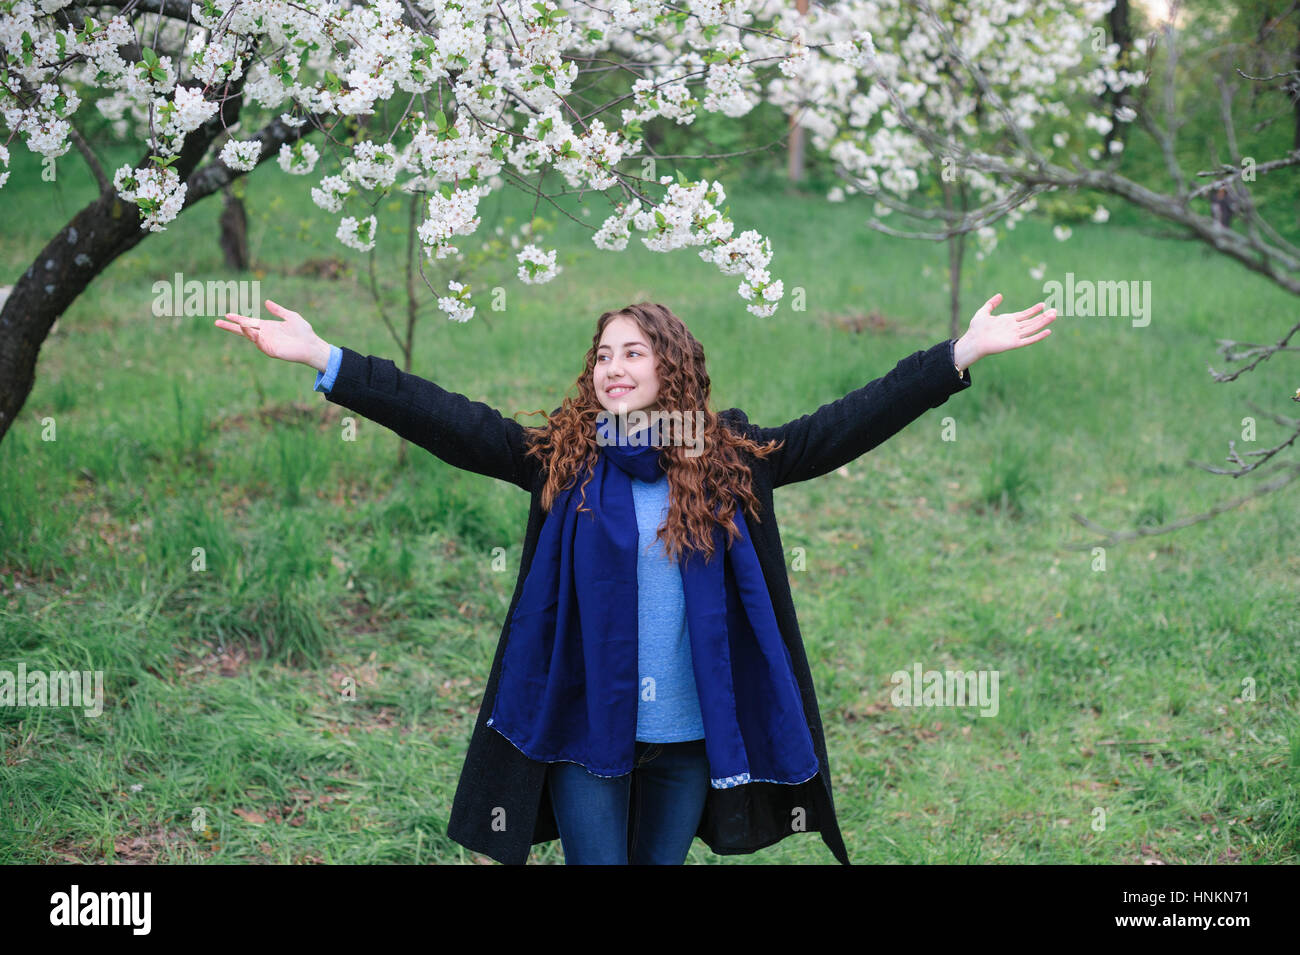 beautiful happy young woman walking in a blossoming spring garden Stock Photo